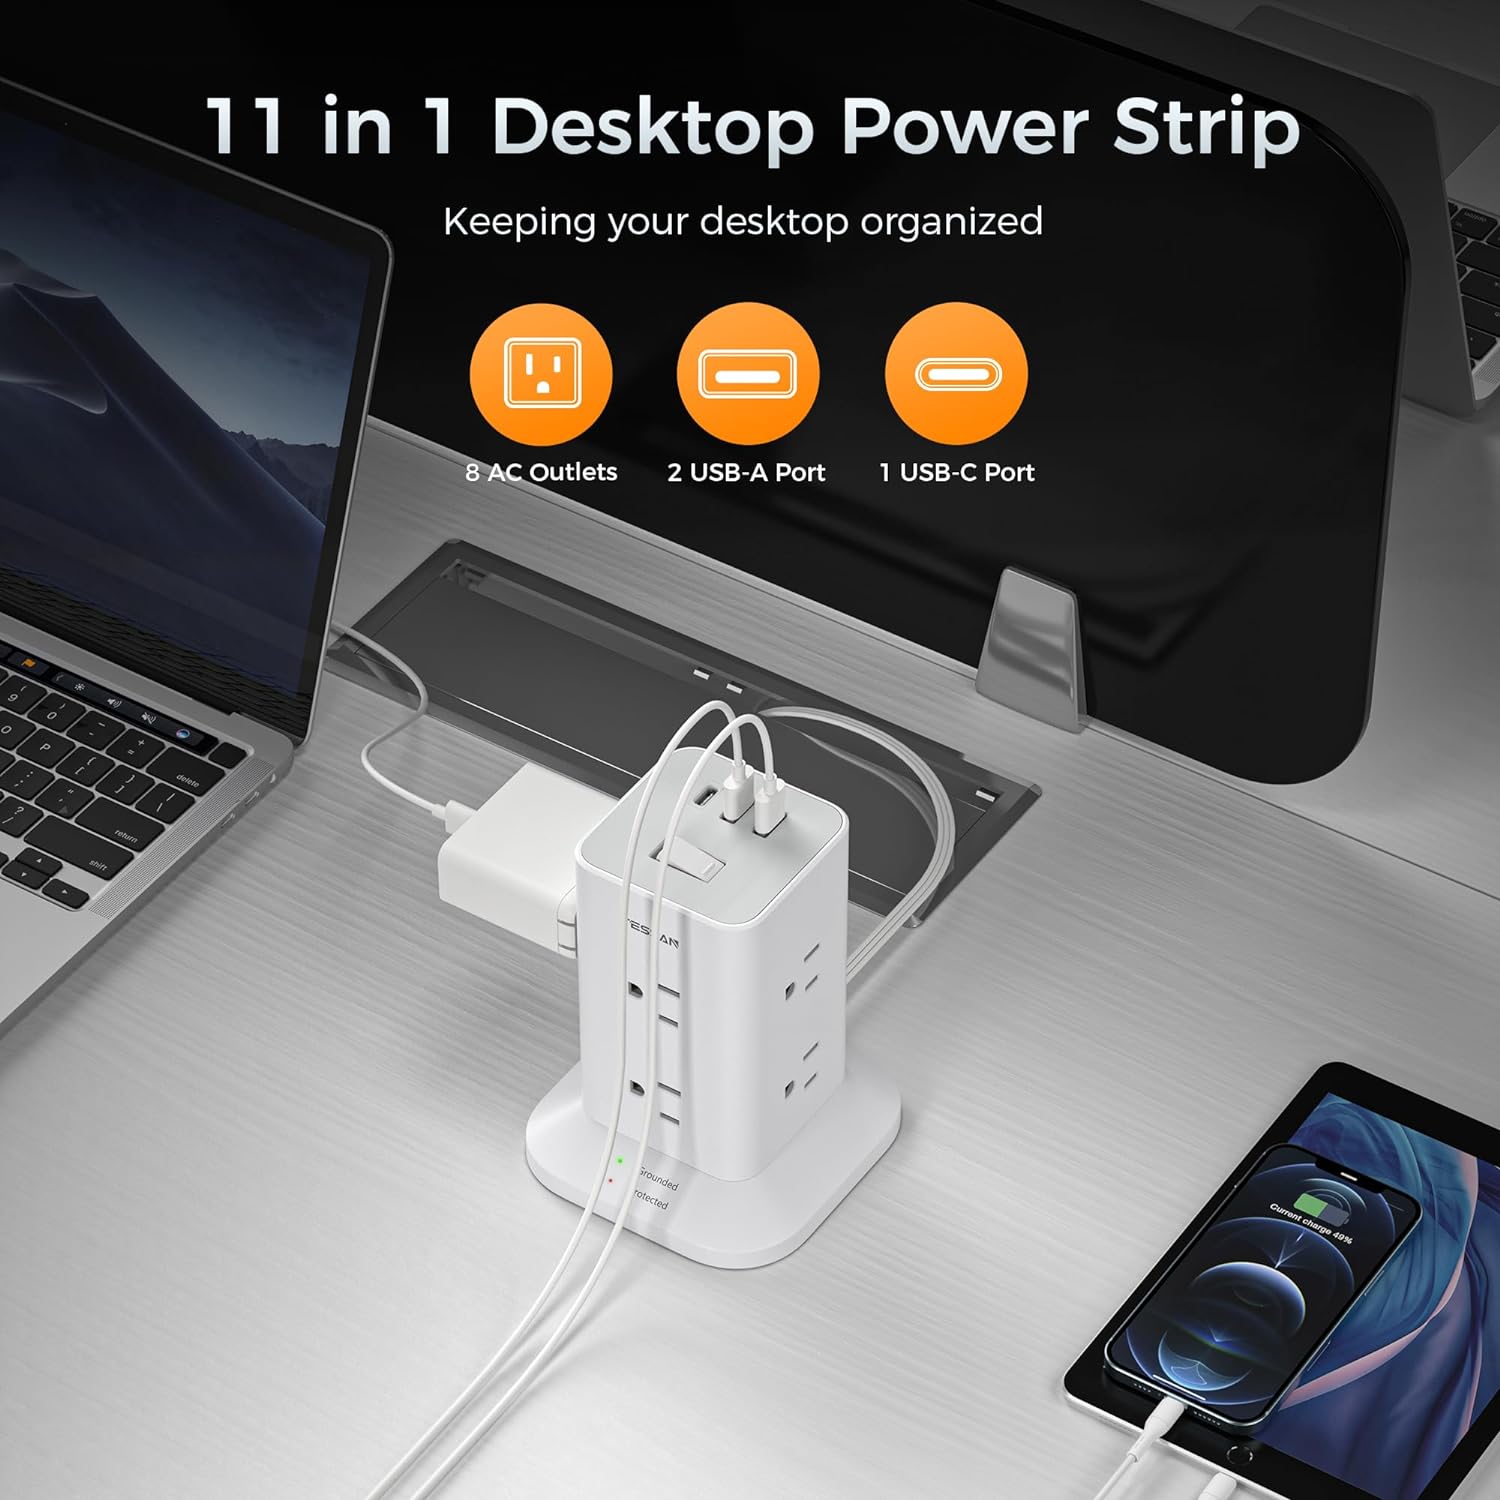 TESSAN Flat Plug Extension Cord with 8 AC Outlets 3 USB Ports (1 USB C), Surge Protector Power Strip Tower 10 FT